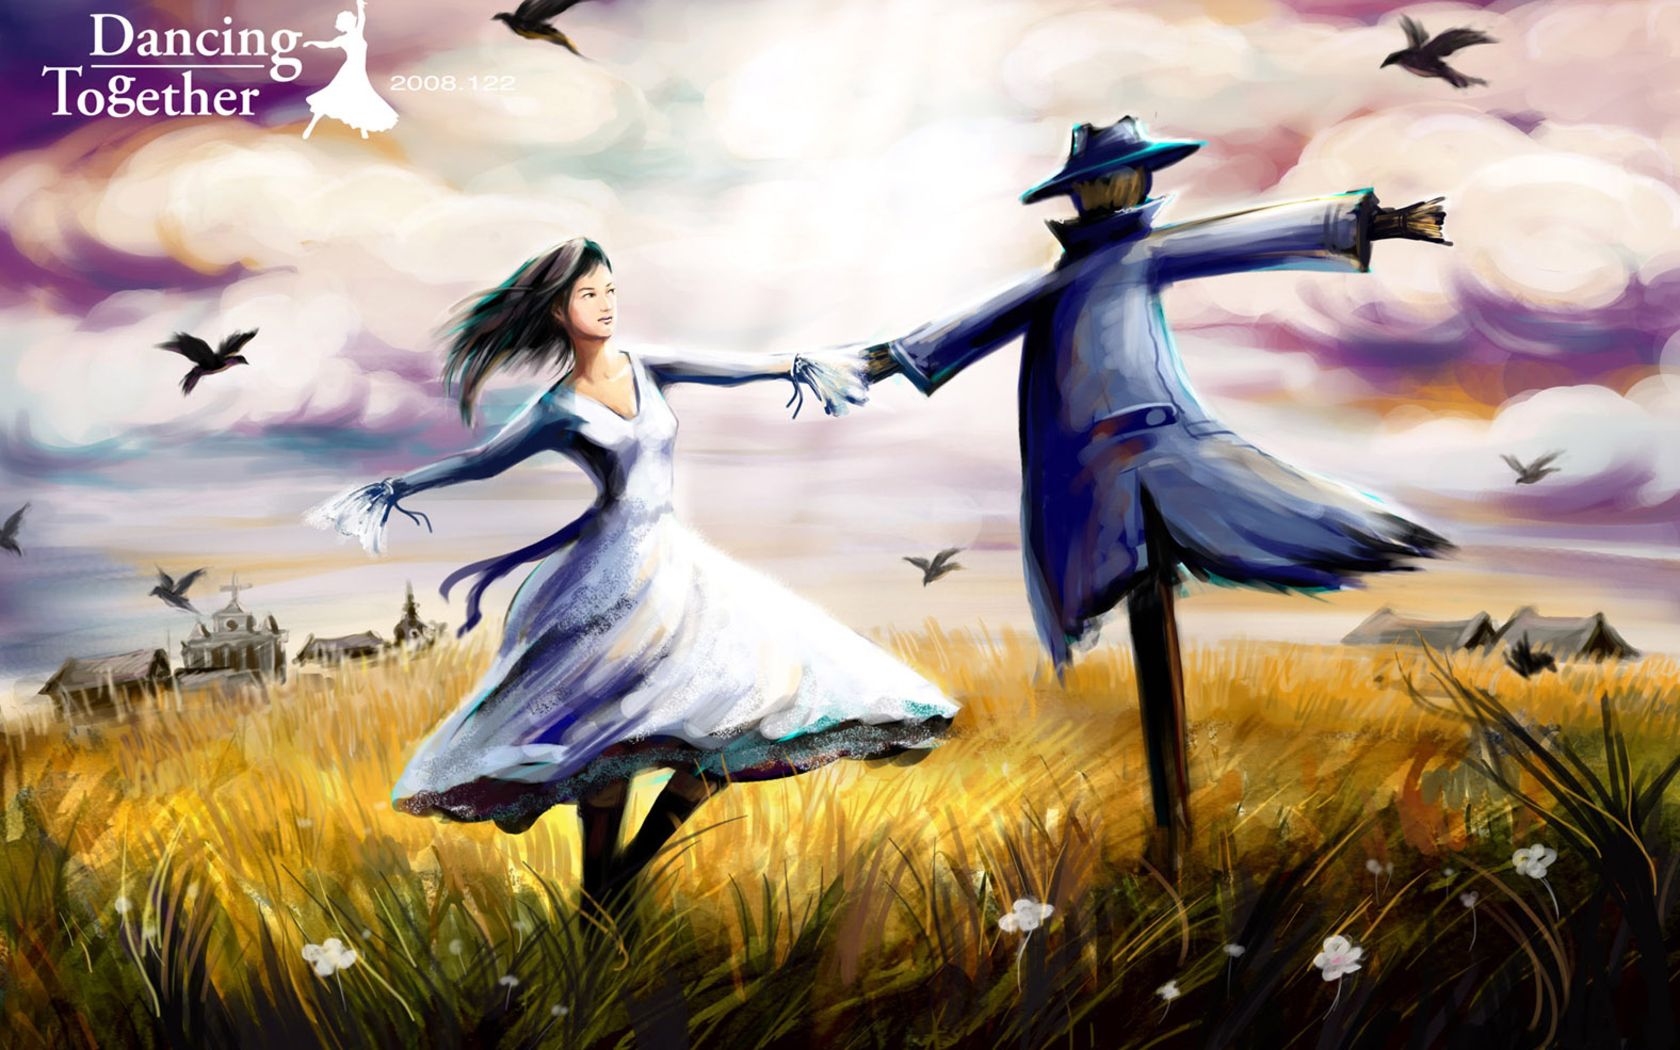 dancing together Wallpaper and Background Imagex1050